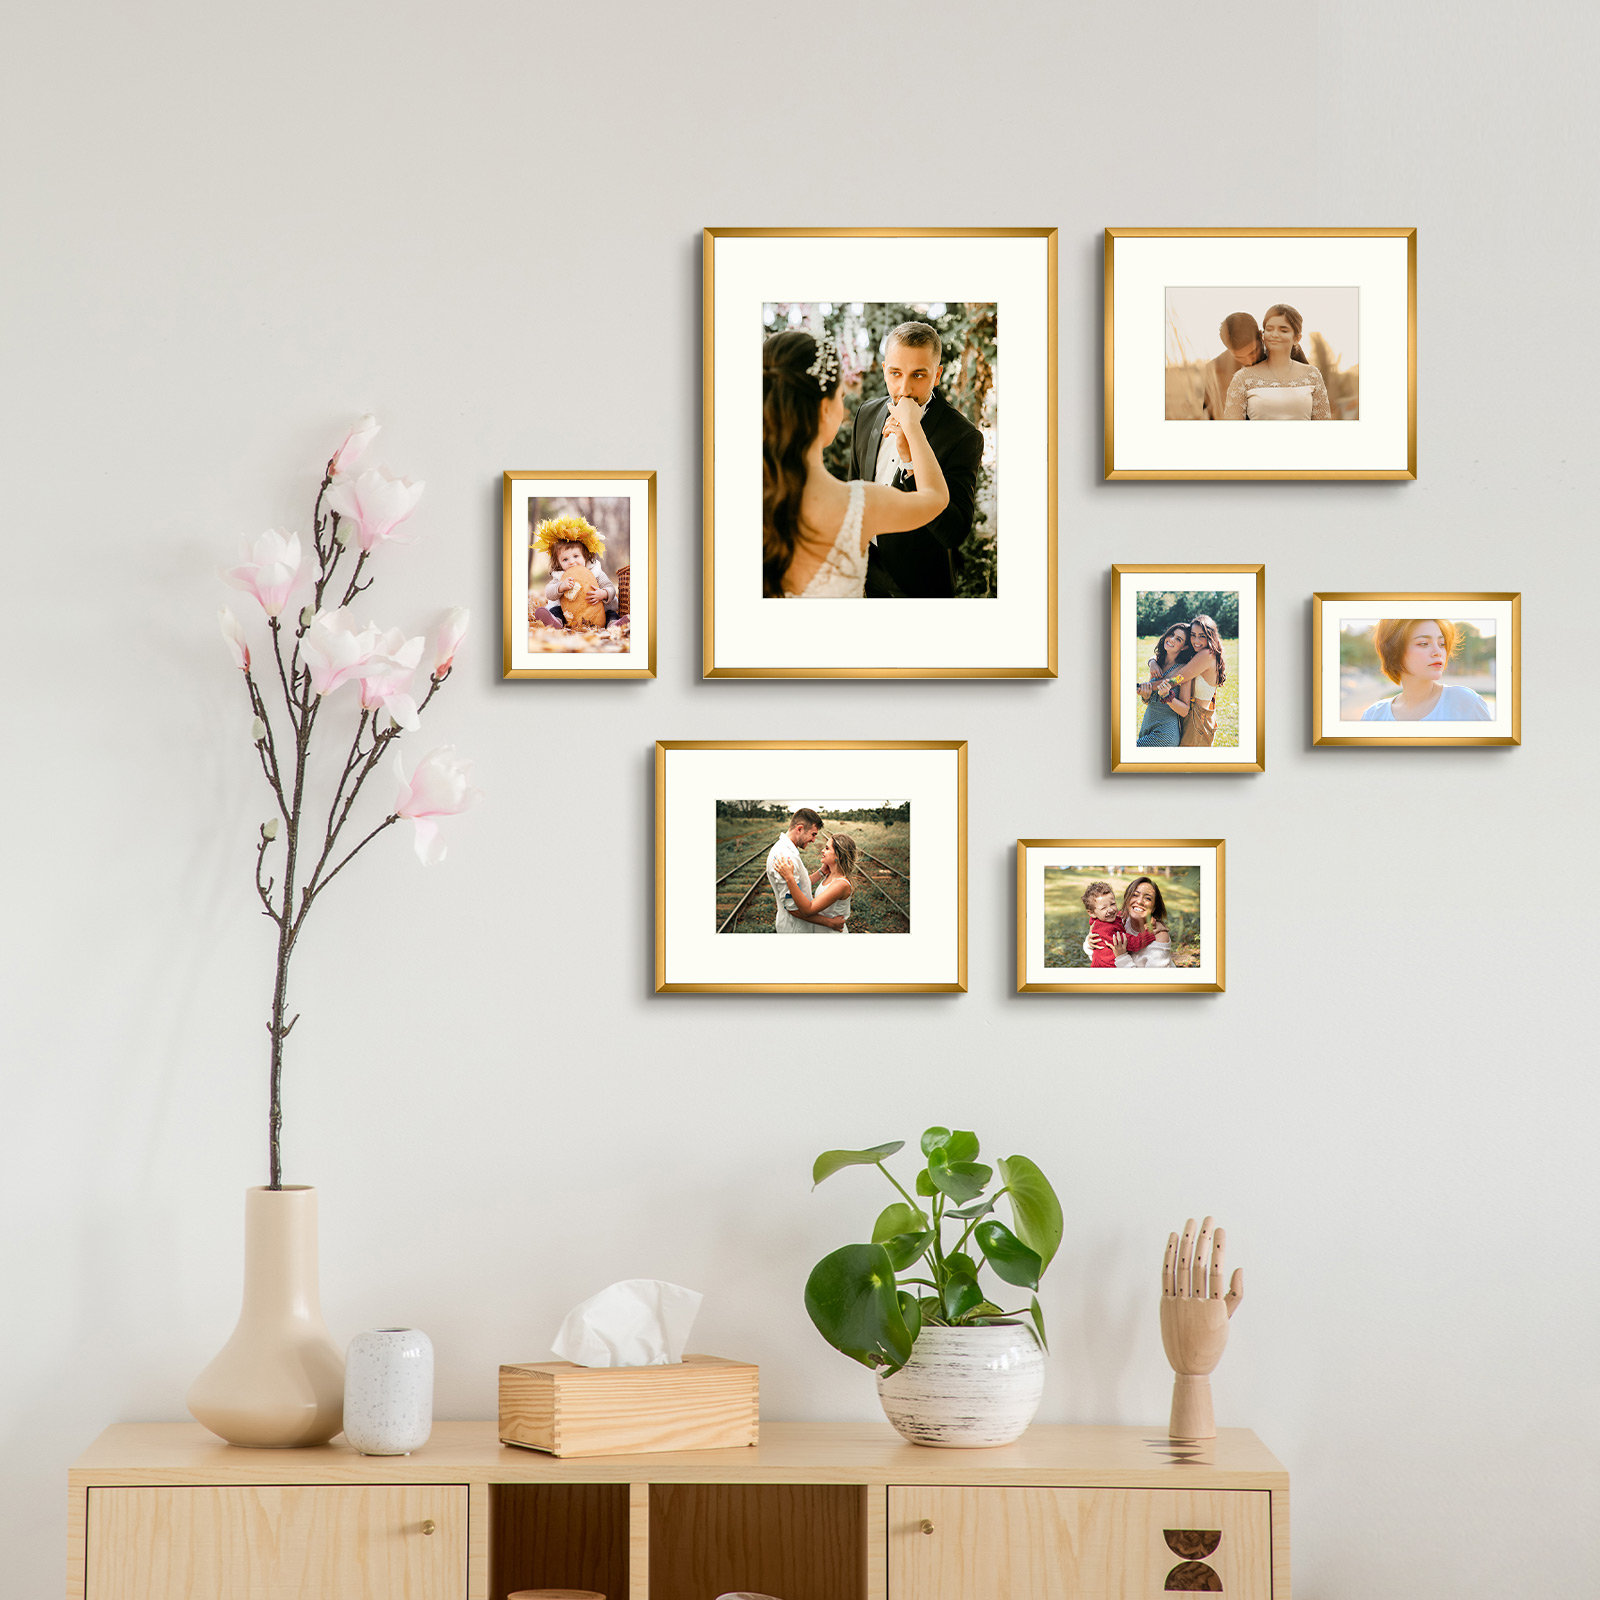 8x10 Picture Frame with Mat for 5x7 Photo Wall or Tabletop Display